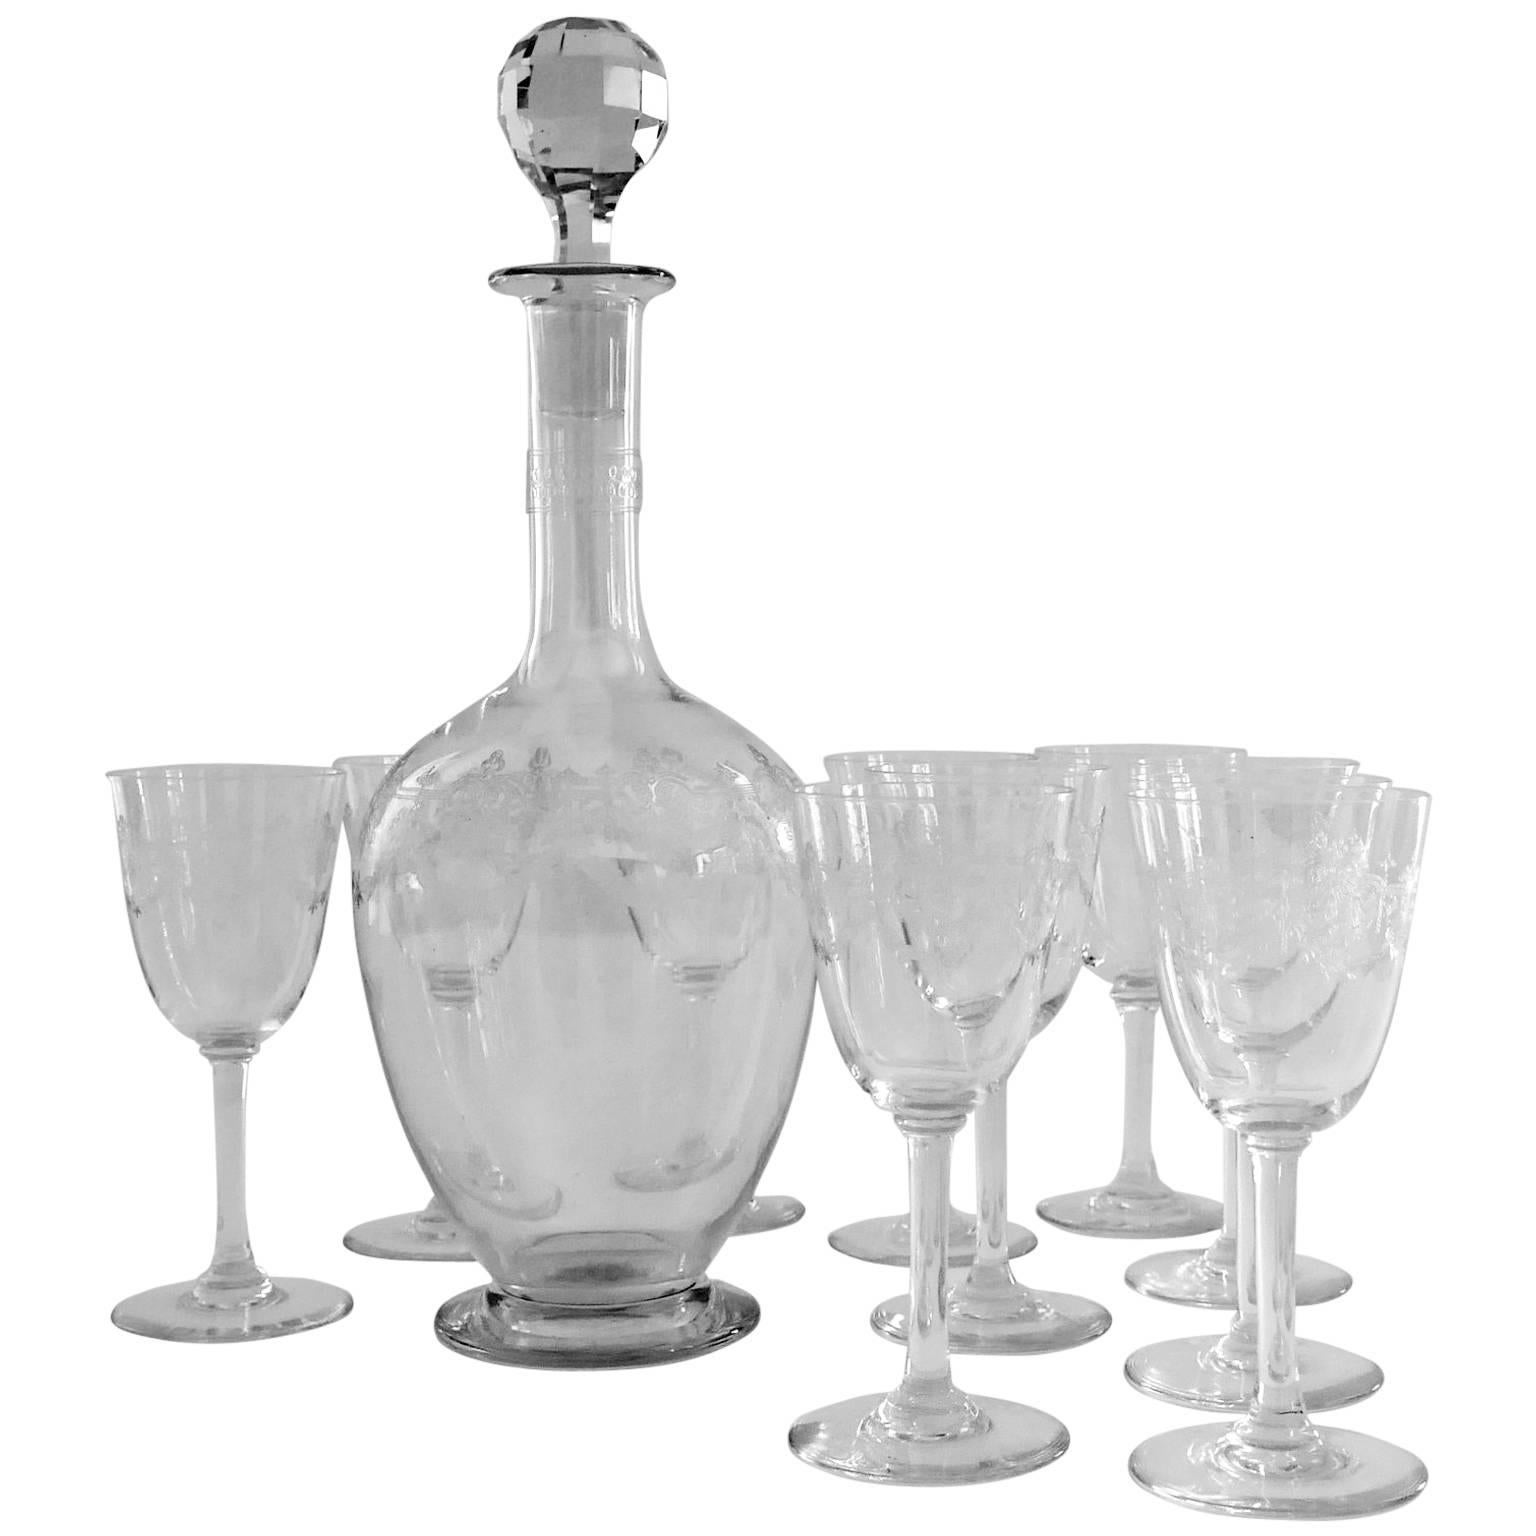 1910s Baccarat "Beauharnais" Engraved Crystal Wine Decanter and Glasses Set